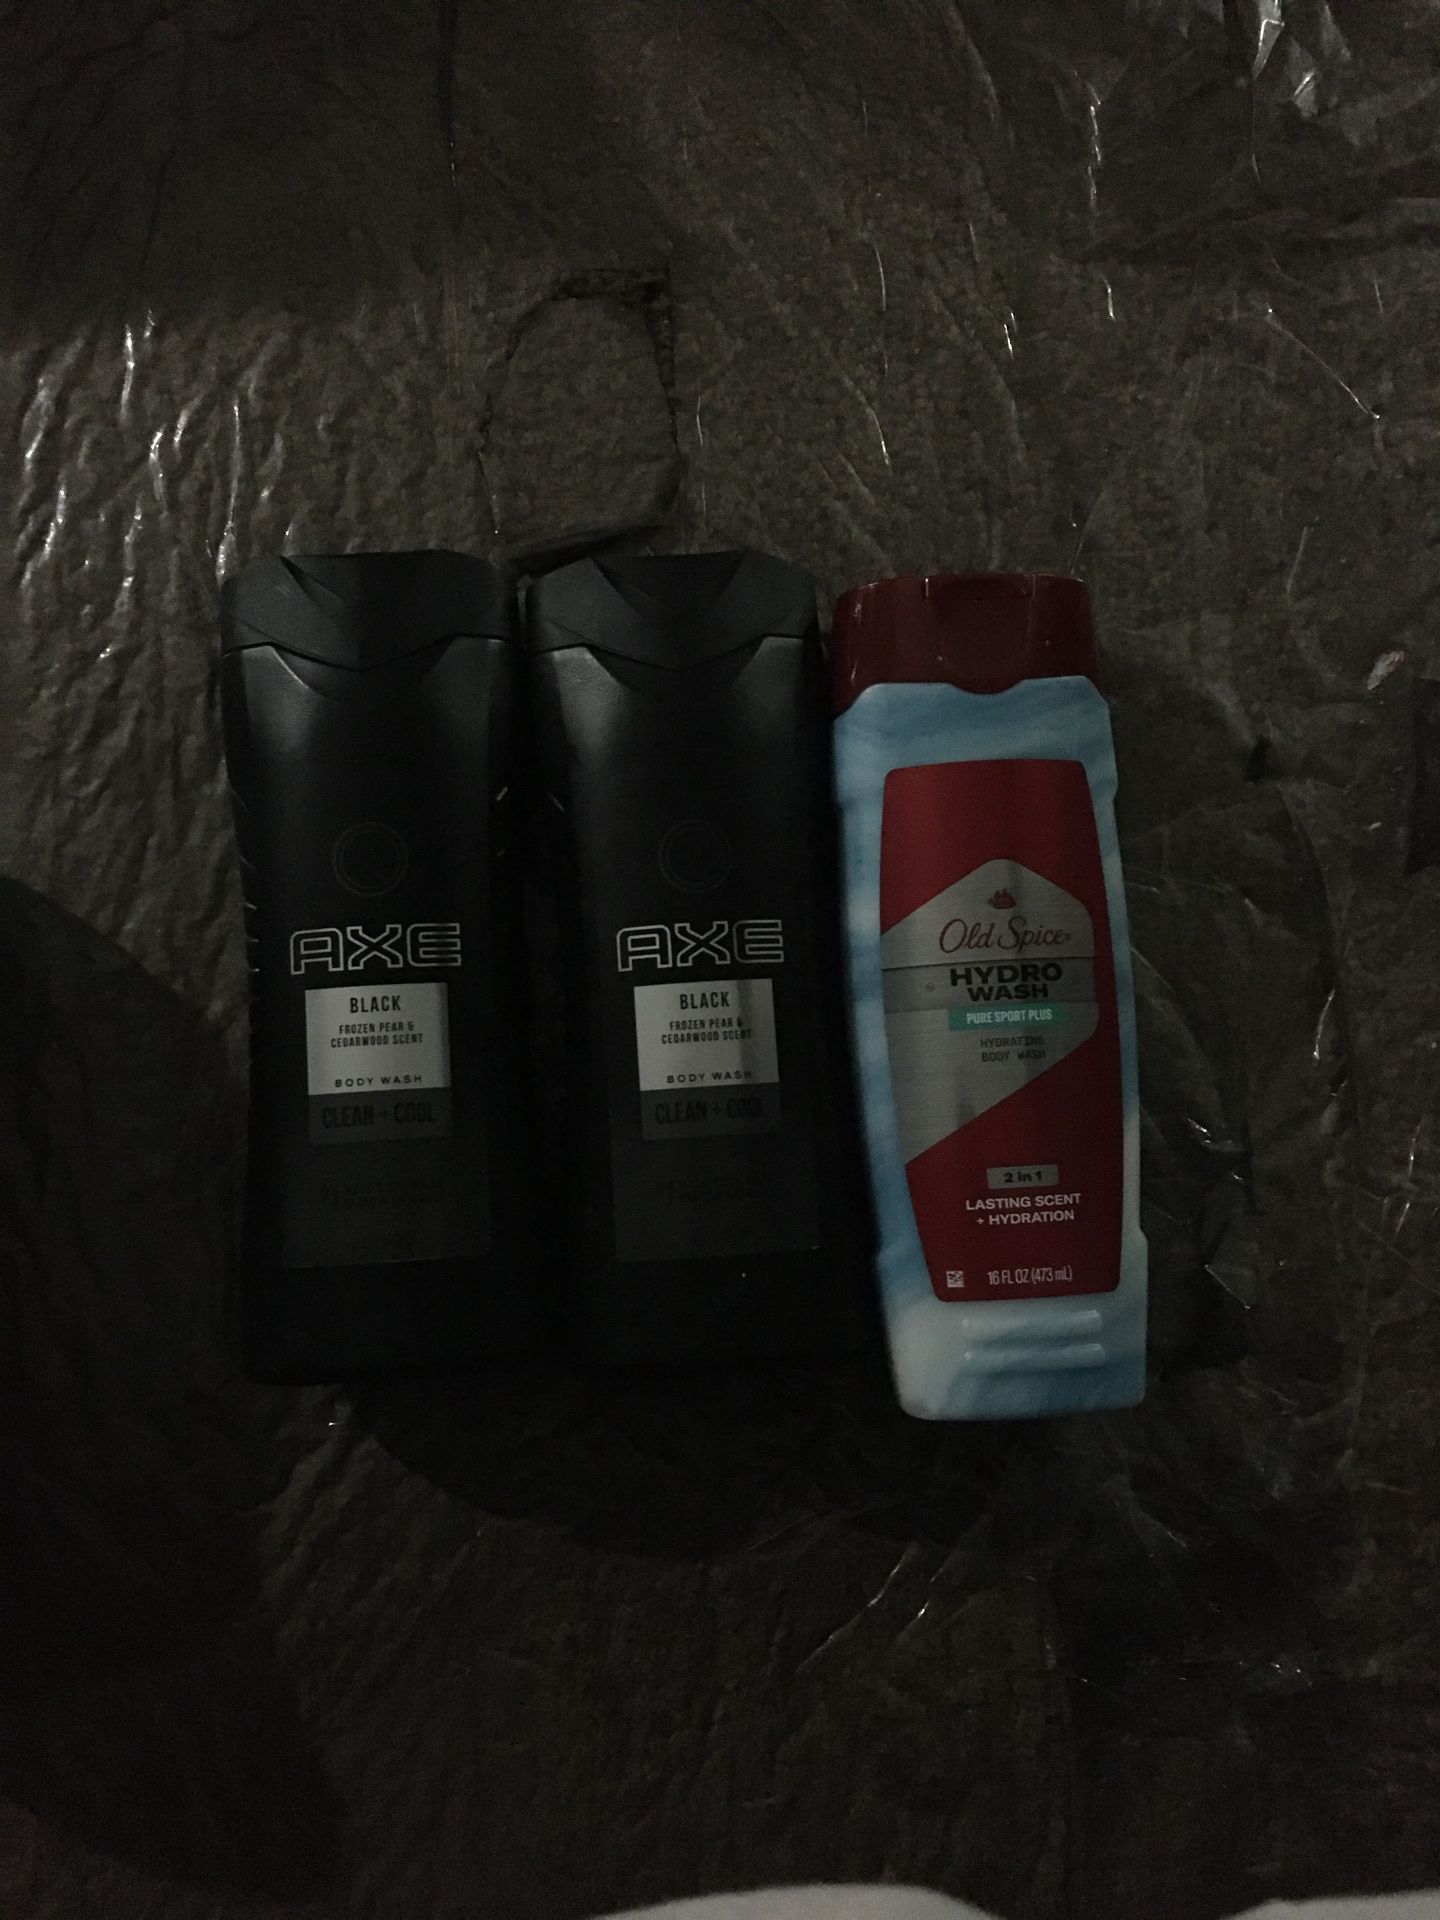 Axe body wash,and old spice body wash